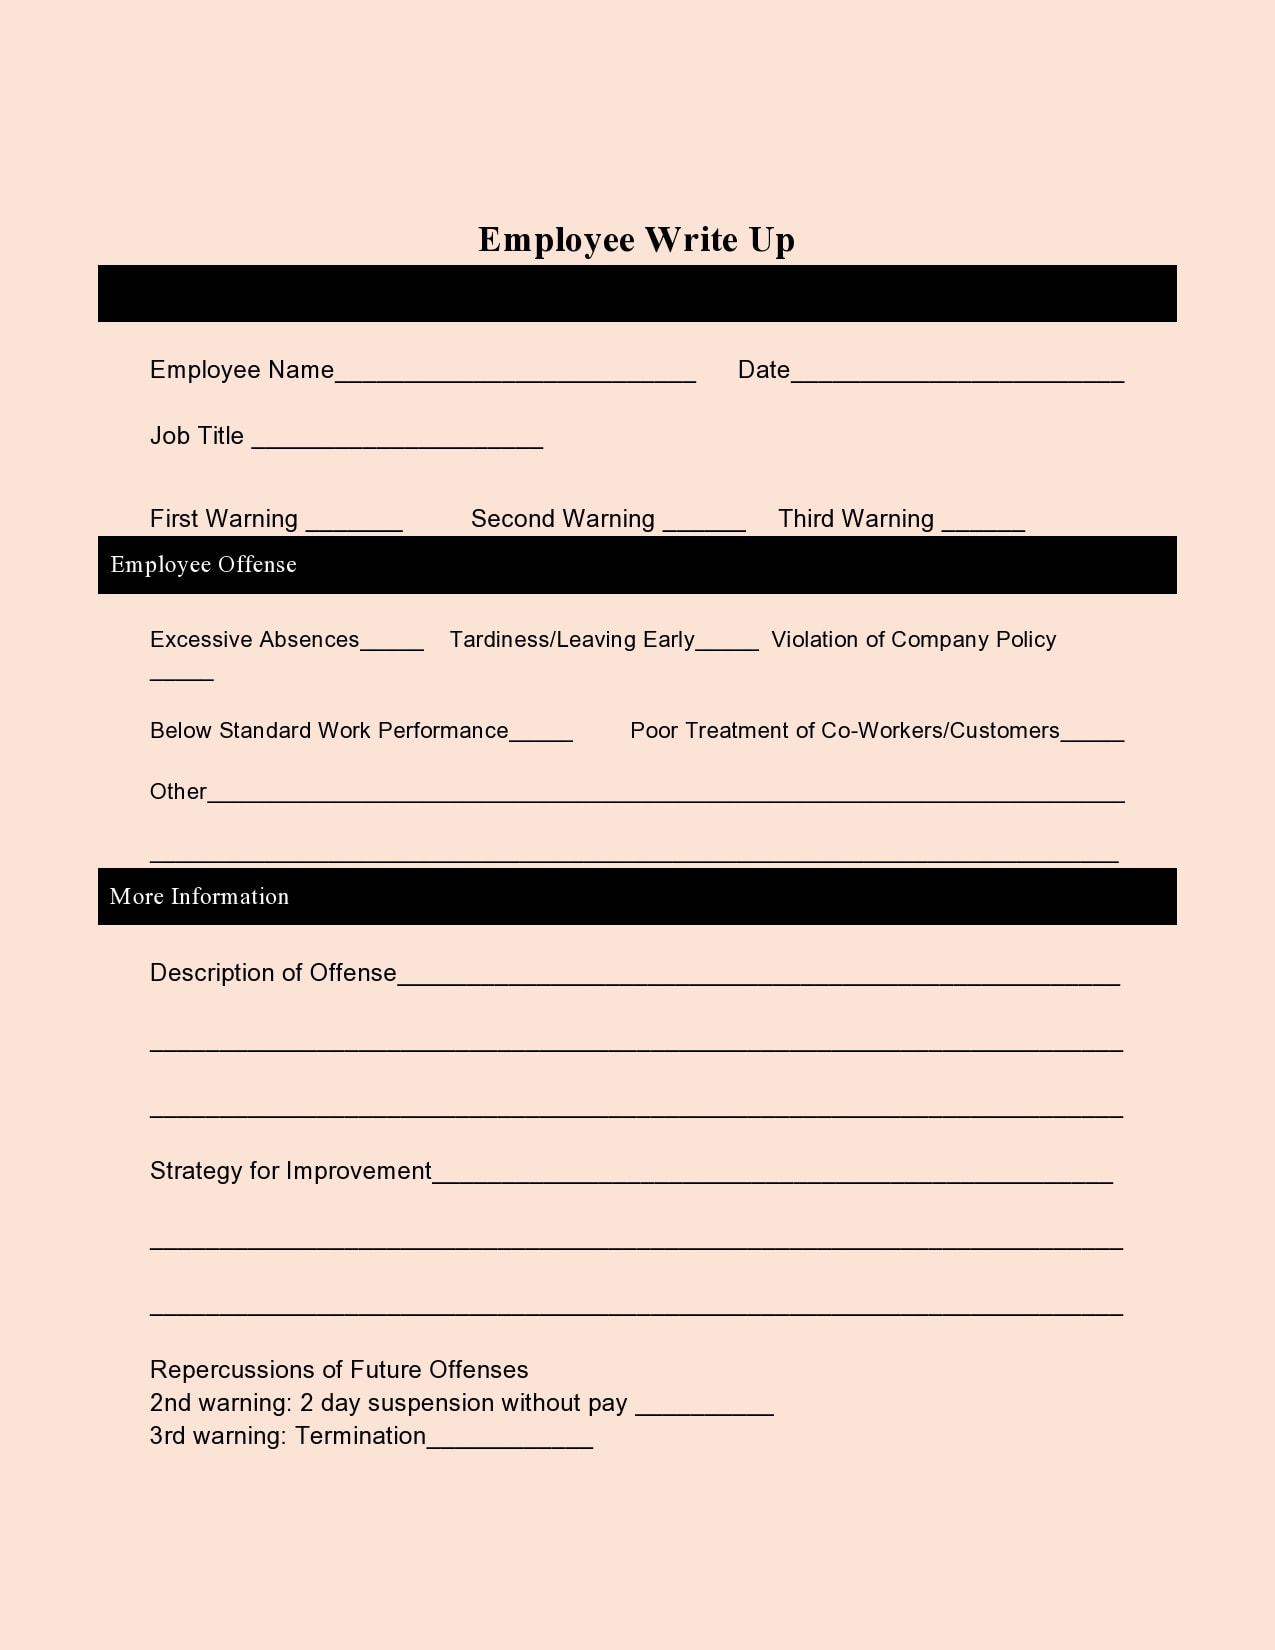 25 Effective Employee Write-Up Forms (Free Download)